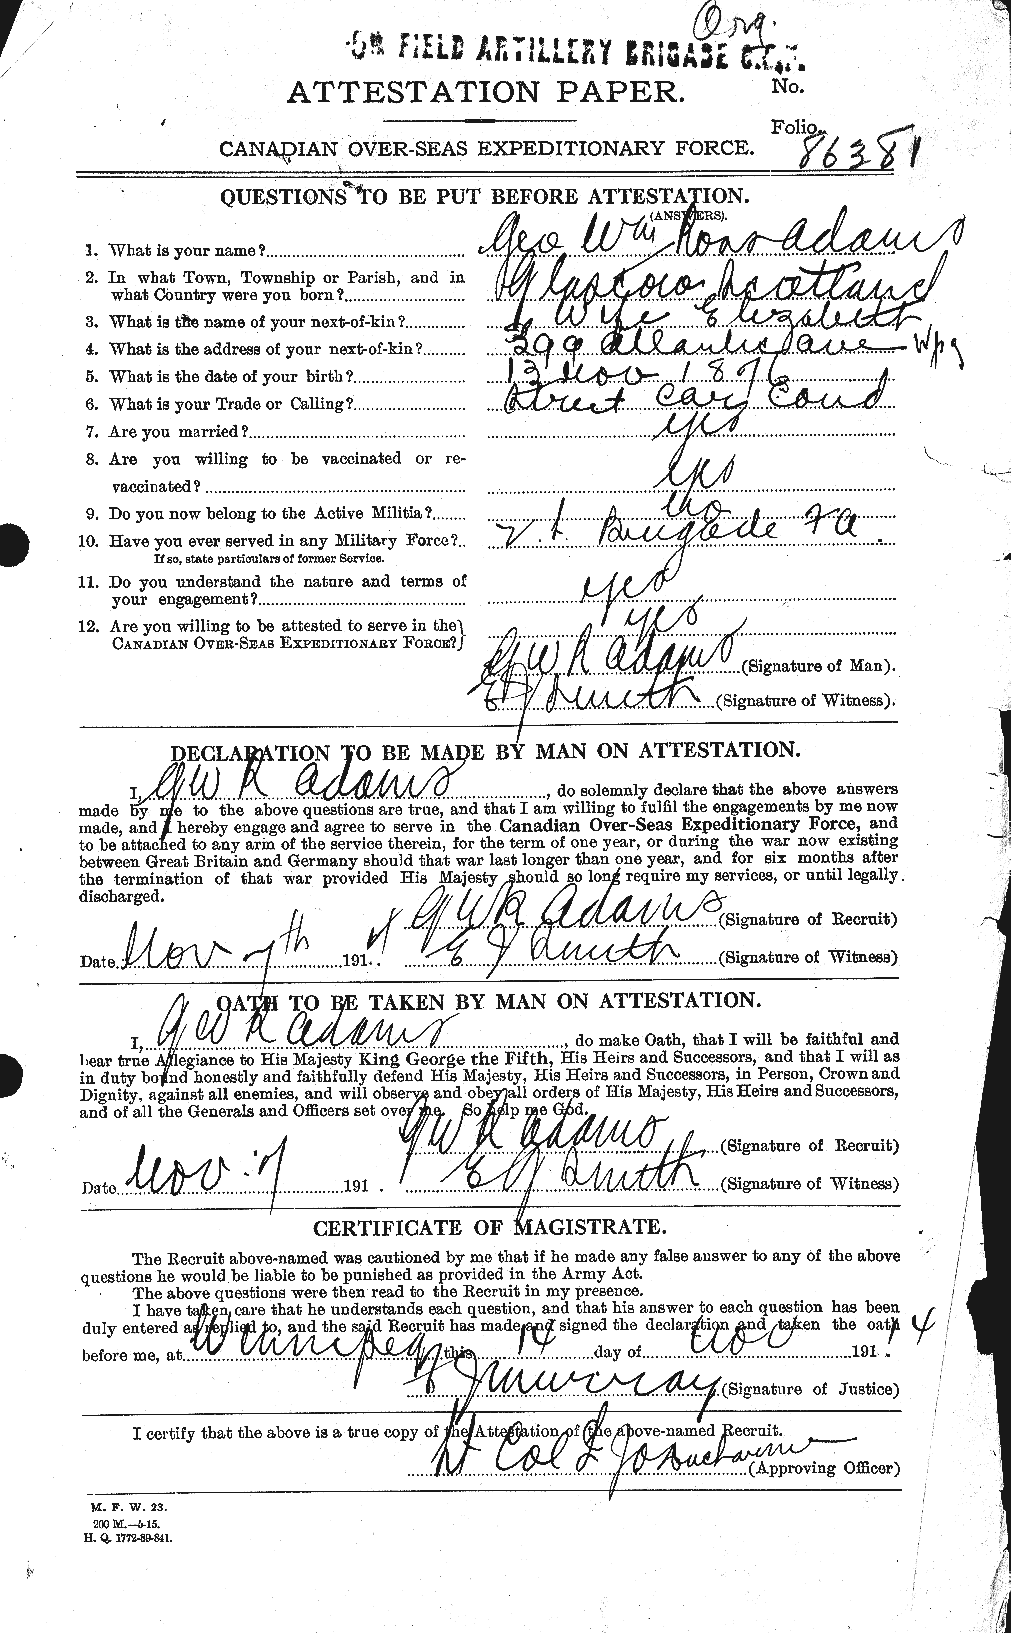 Personnel Records of the First World War - CEF 203126a